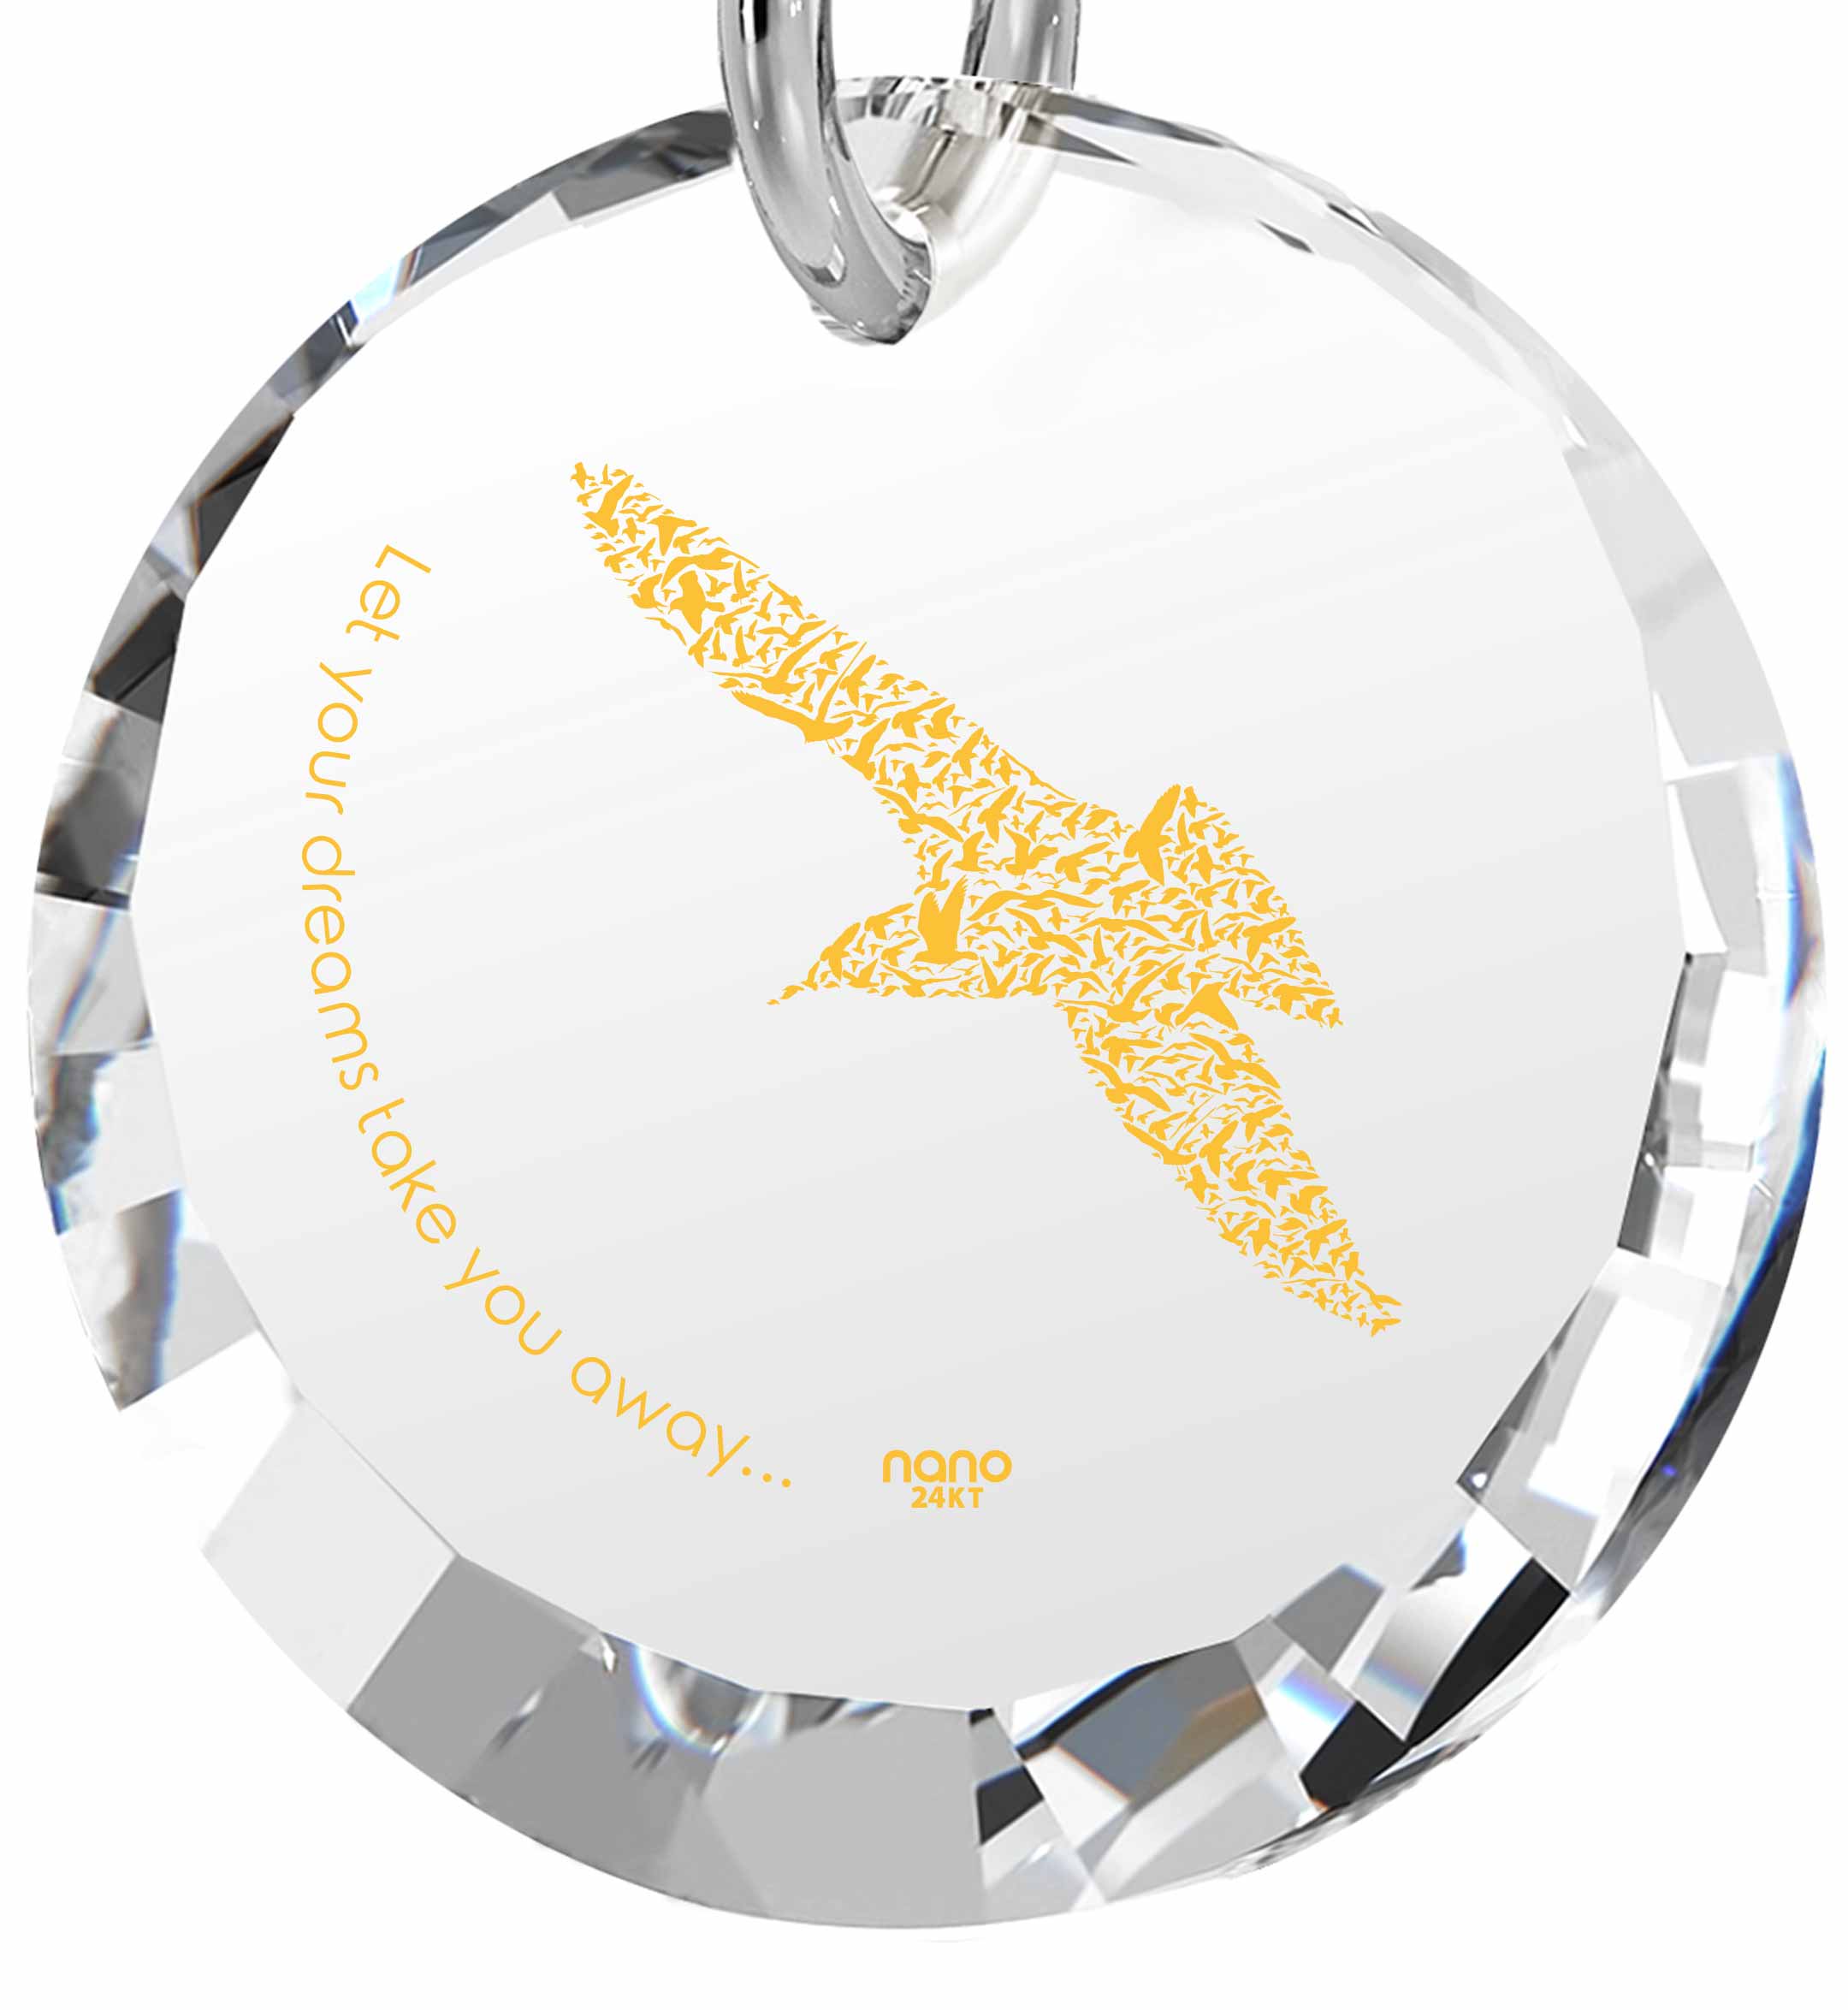 Mother Daughter Charm Necklace Inspirational Bird Pendant with a circular pendant featuring a yellow and white design under a magnifying glass cover, accompanied by a 'symbolic jewelry' tag.